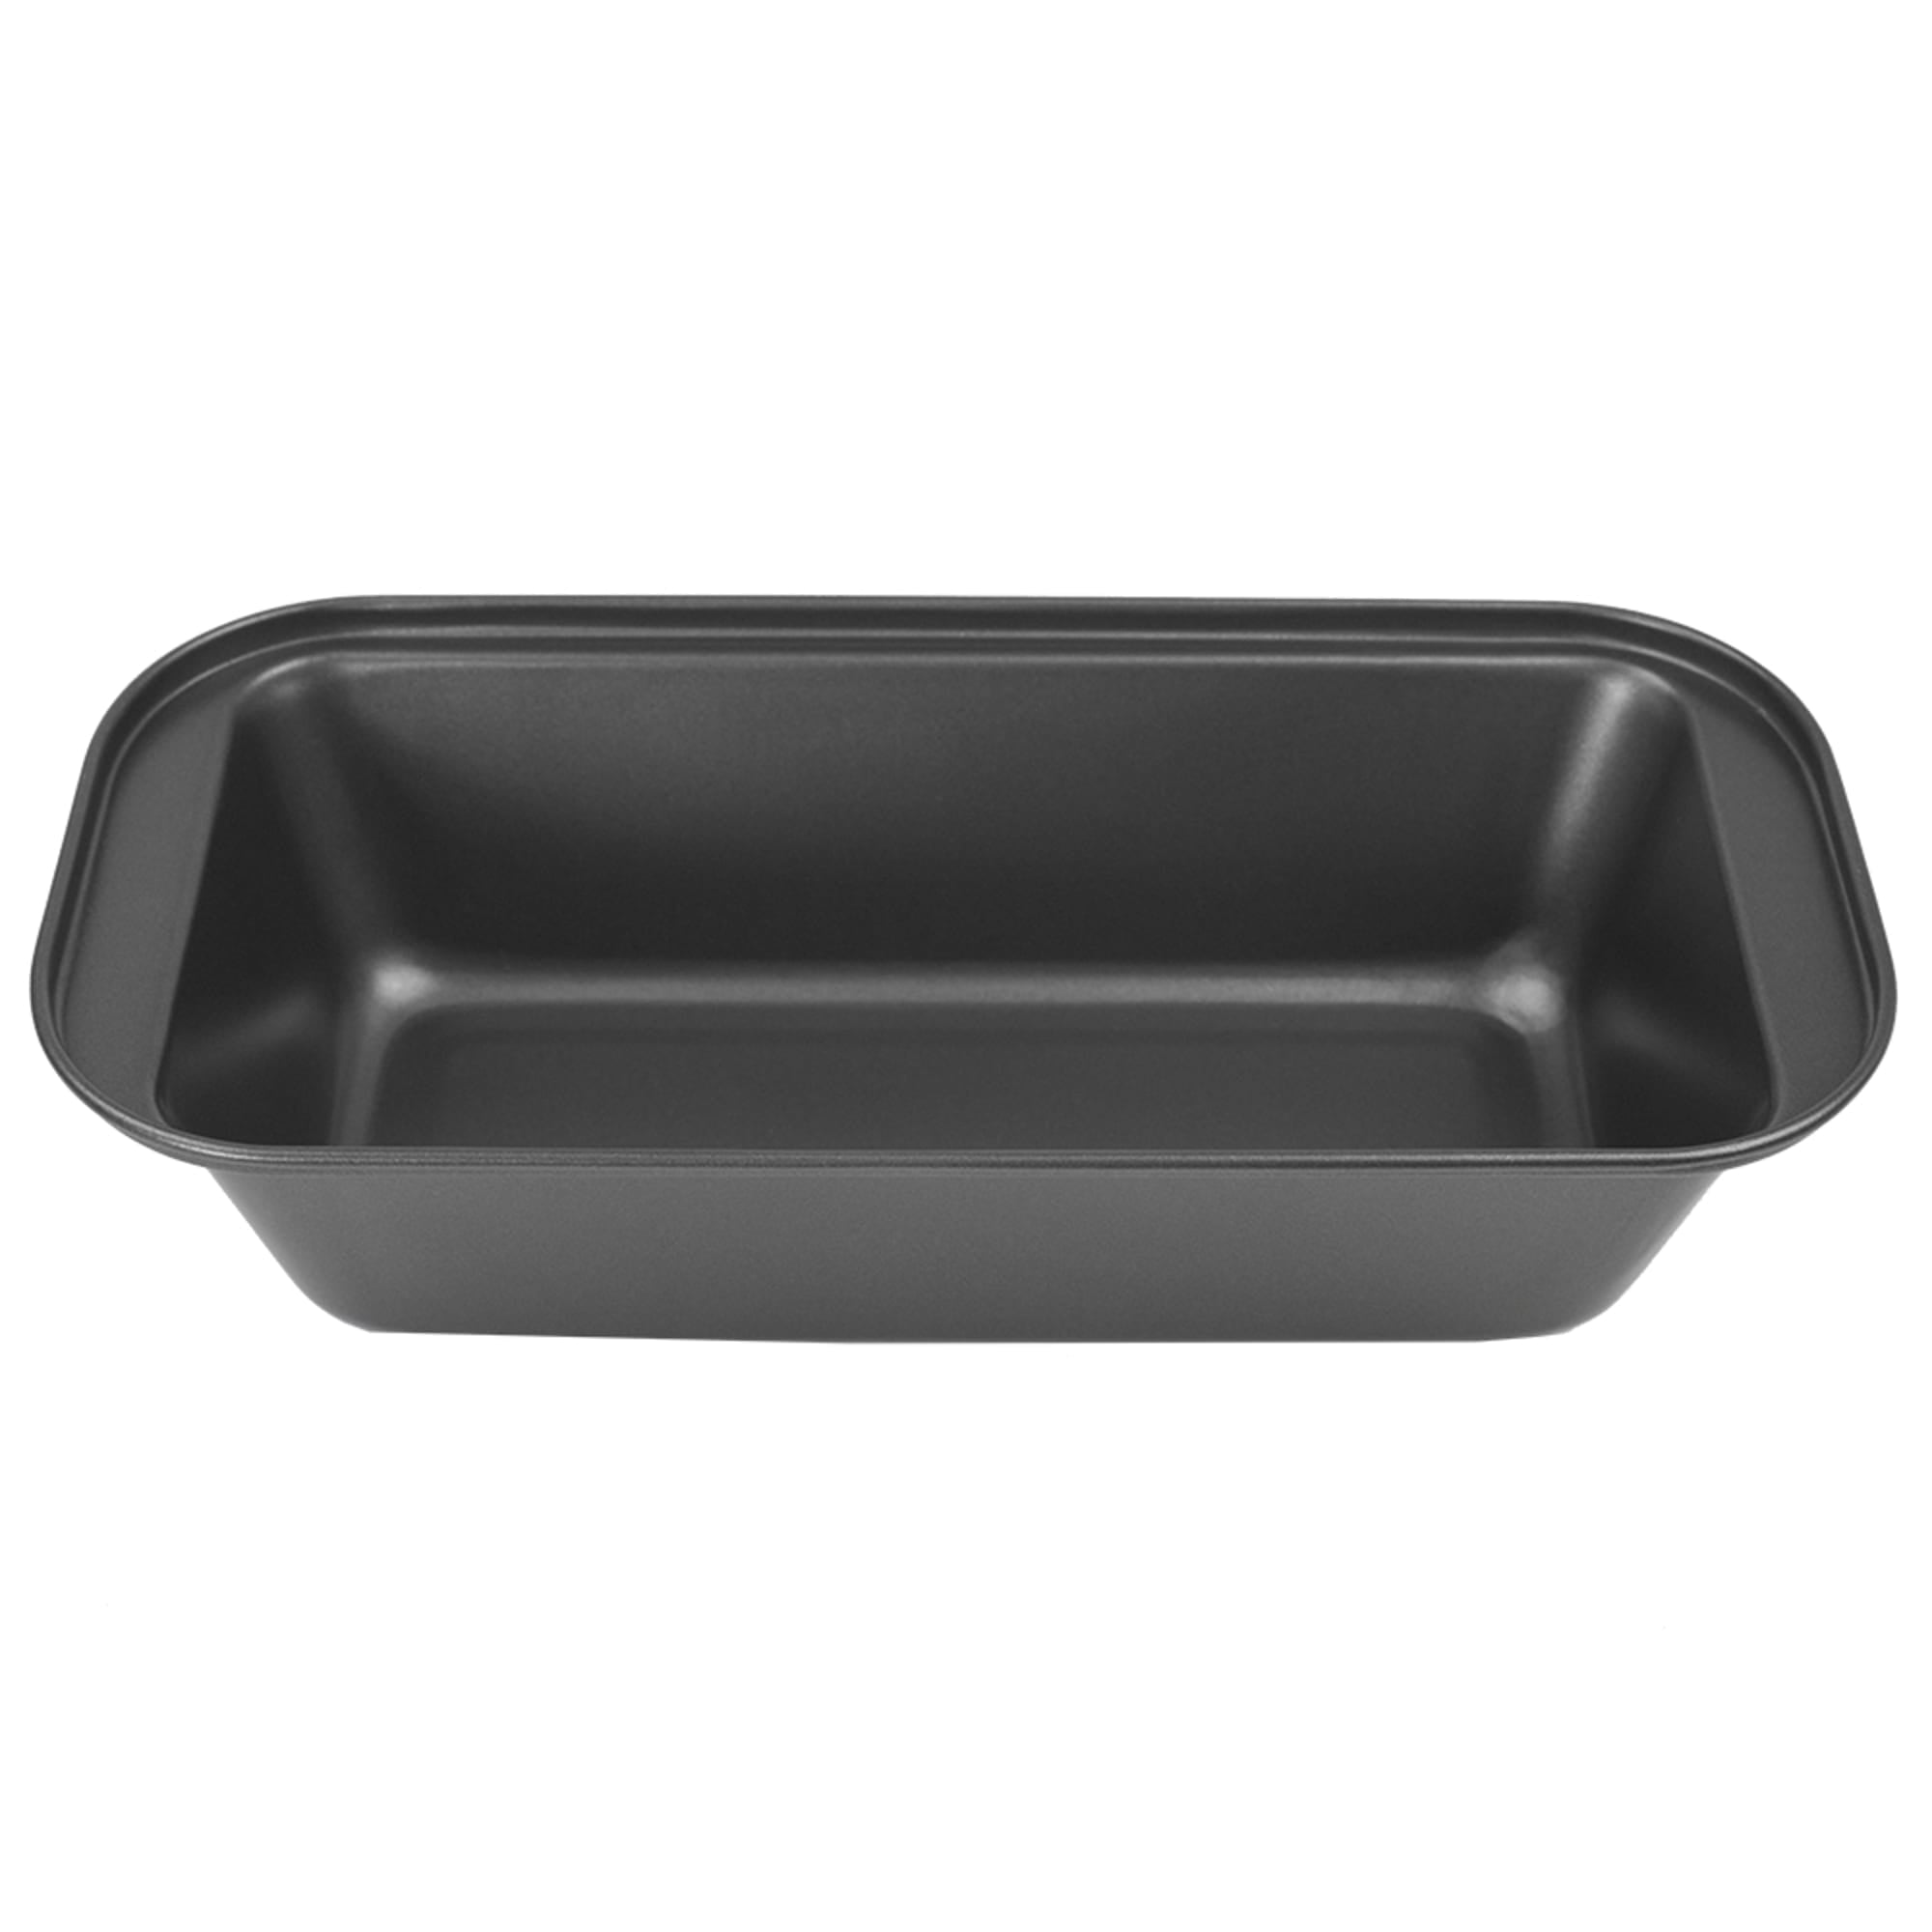 Home Basics Non-Stick Loaf Pan $3.00 EACH, CASE PACK OF 24